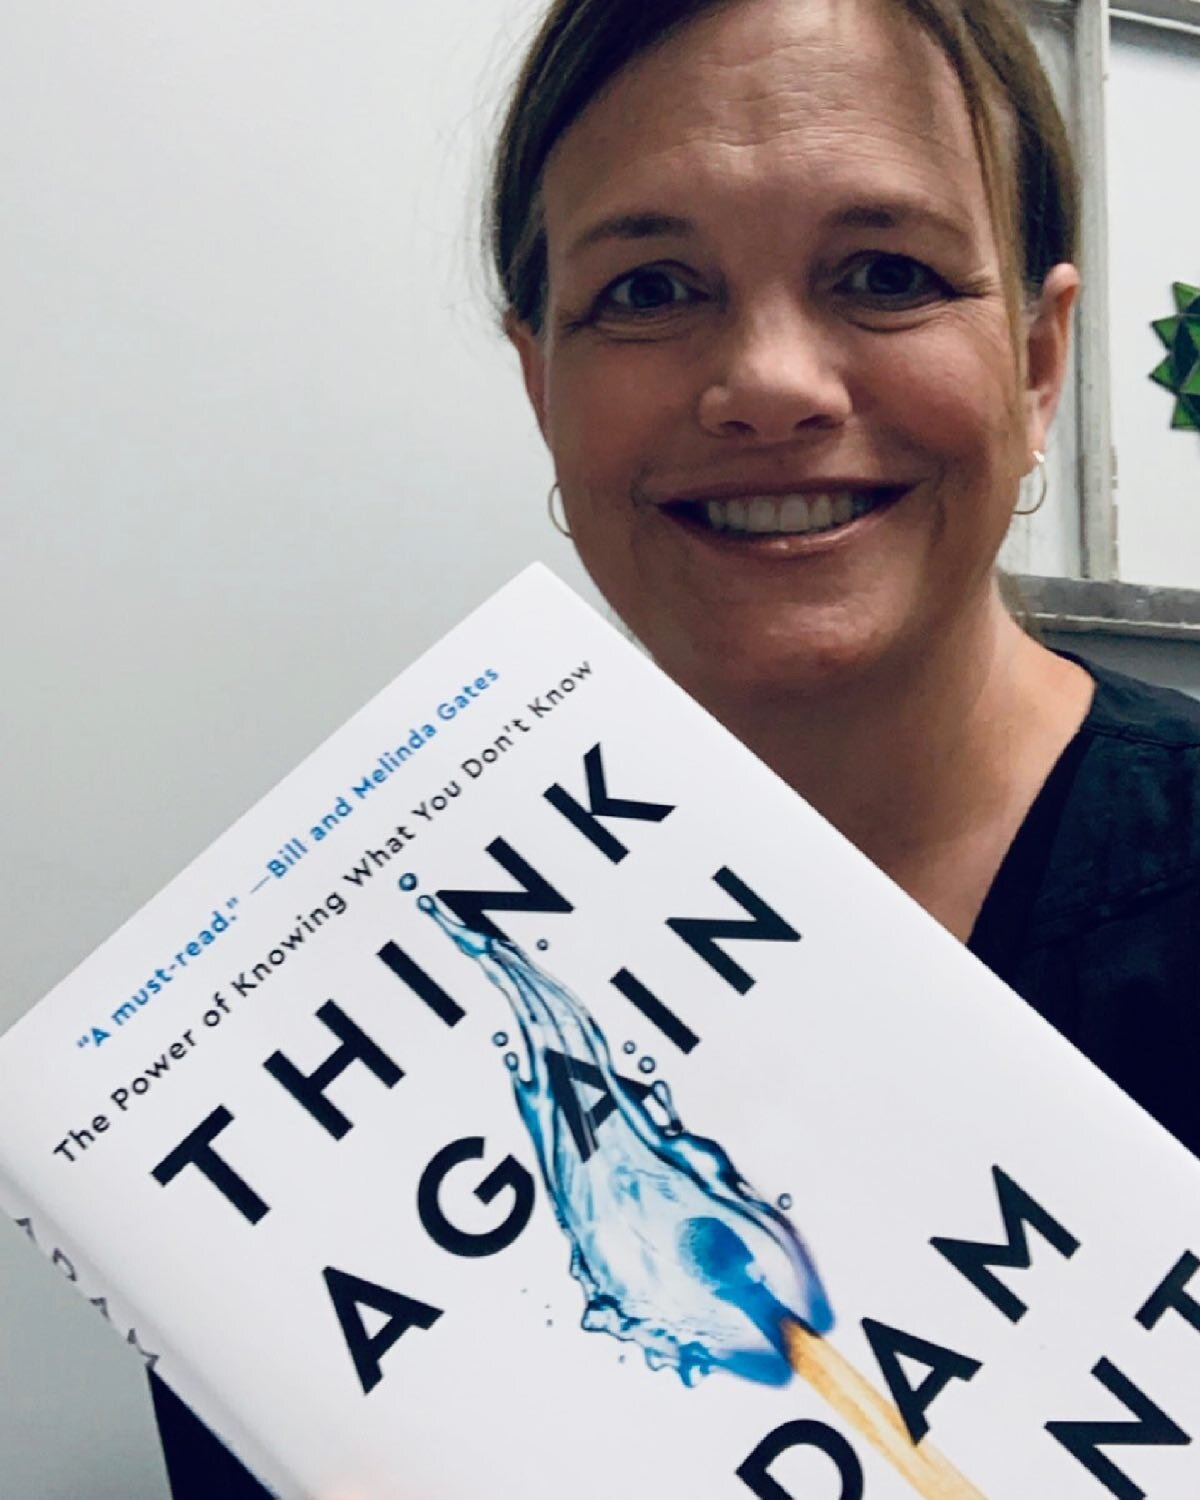 What&rsquo;s on your summer reading list? 📚 Here is one book that I am currently enjoying: &ldquo;Think Again&rdquo; by @adamgrant. It&rsquo;s all about open-mindedness and challenging yourself to re-think your opinions and decisions. Speaking of wh